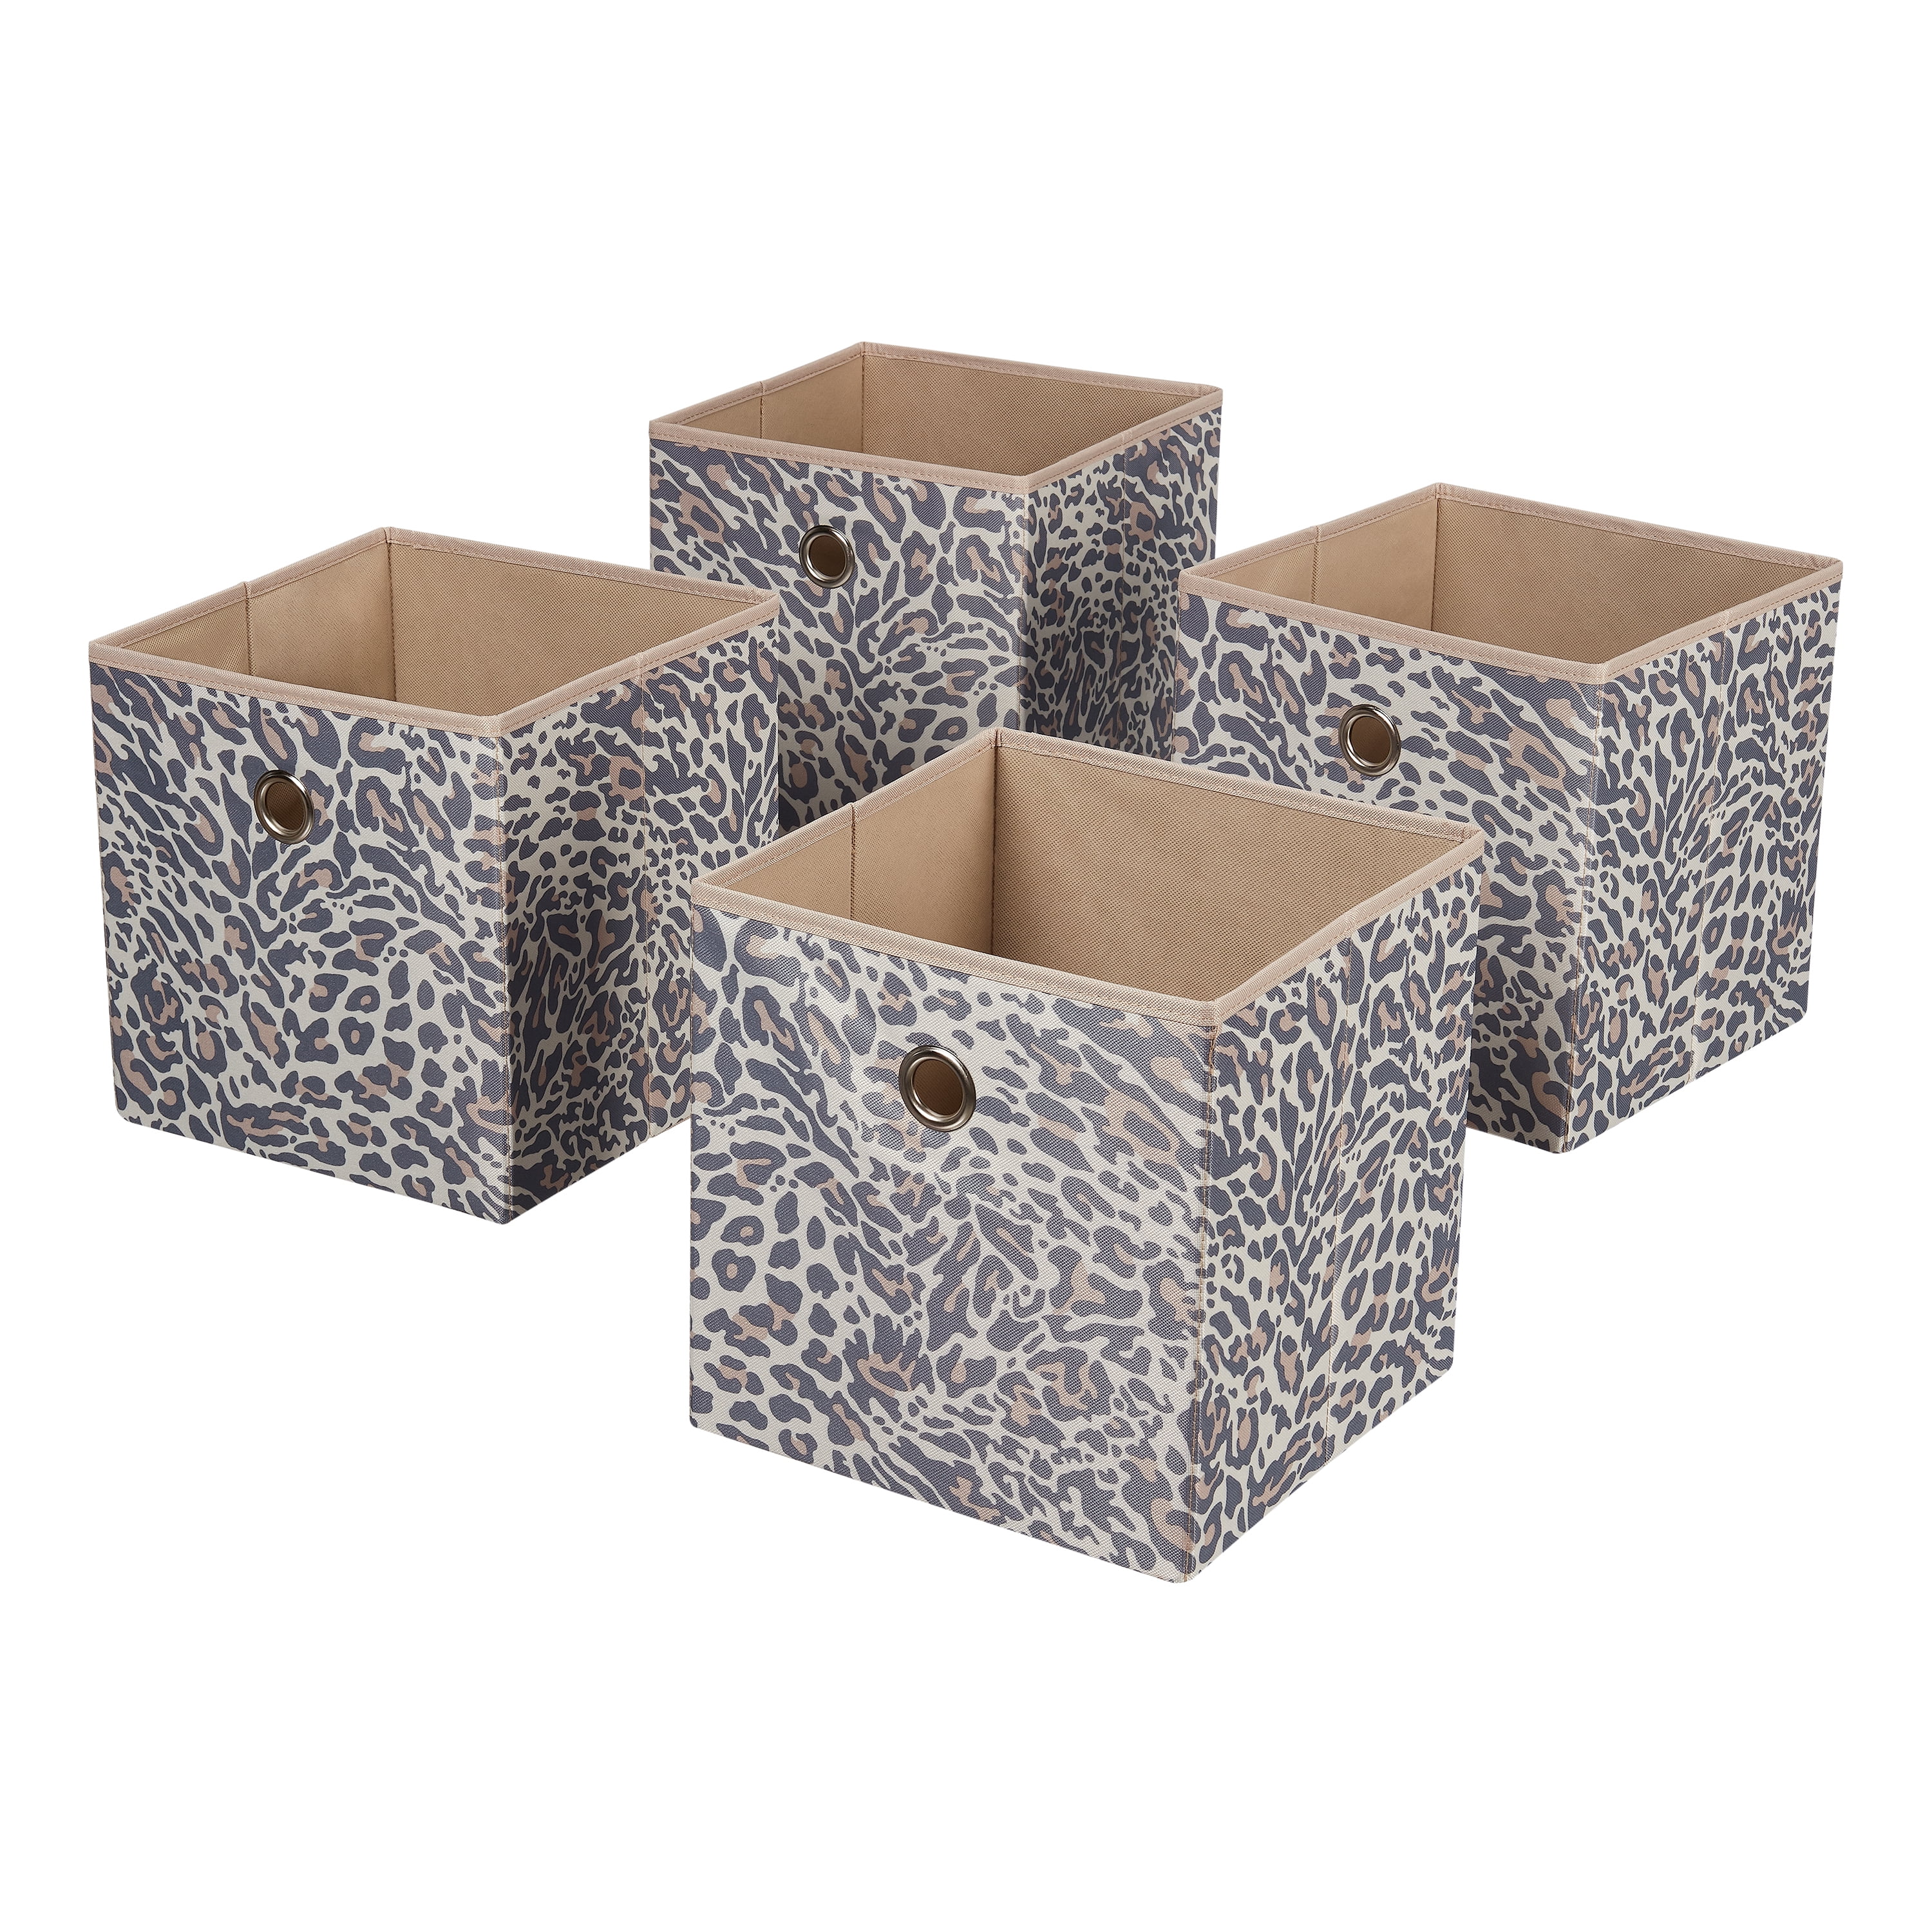 7.2 X 4.7 X 2.2 Pastel Brown Rose Pale Sage Green Charcoal Grey Portable Rectangle Metal Organizer Storage Box with Lid Cartoon Pattern of Leopards Ambesonne Animal Print Tin Box 